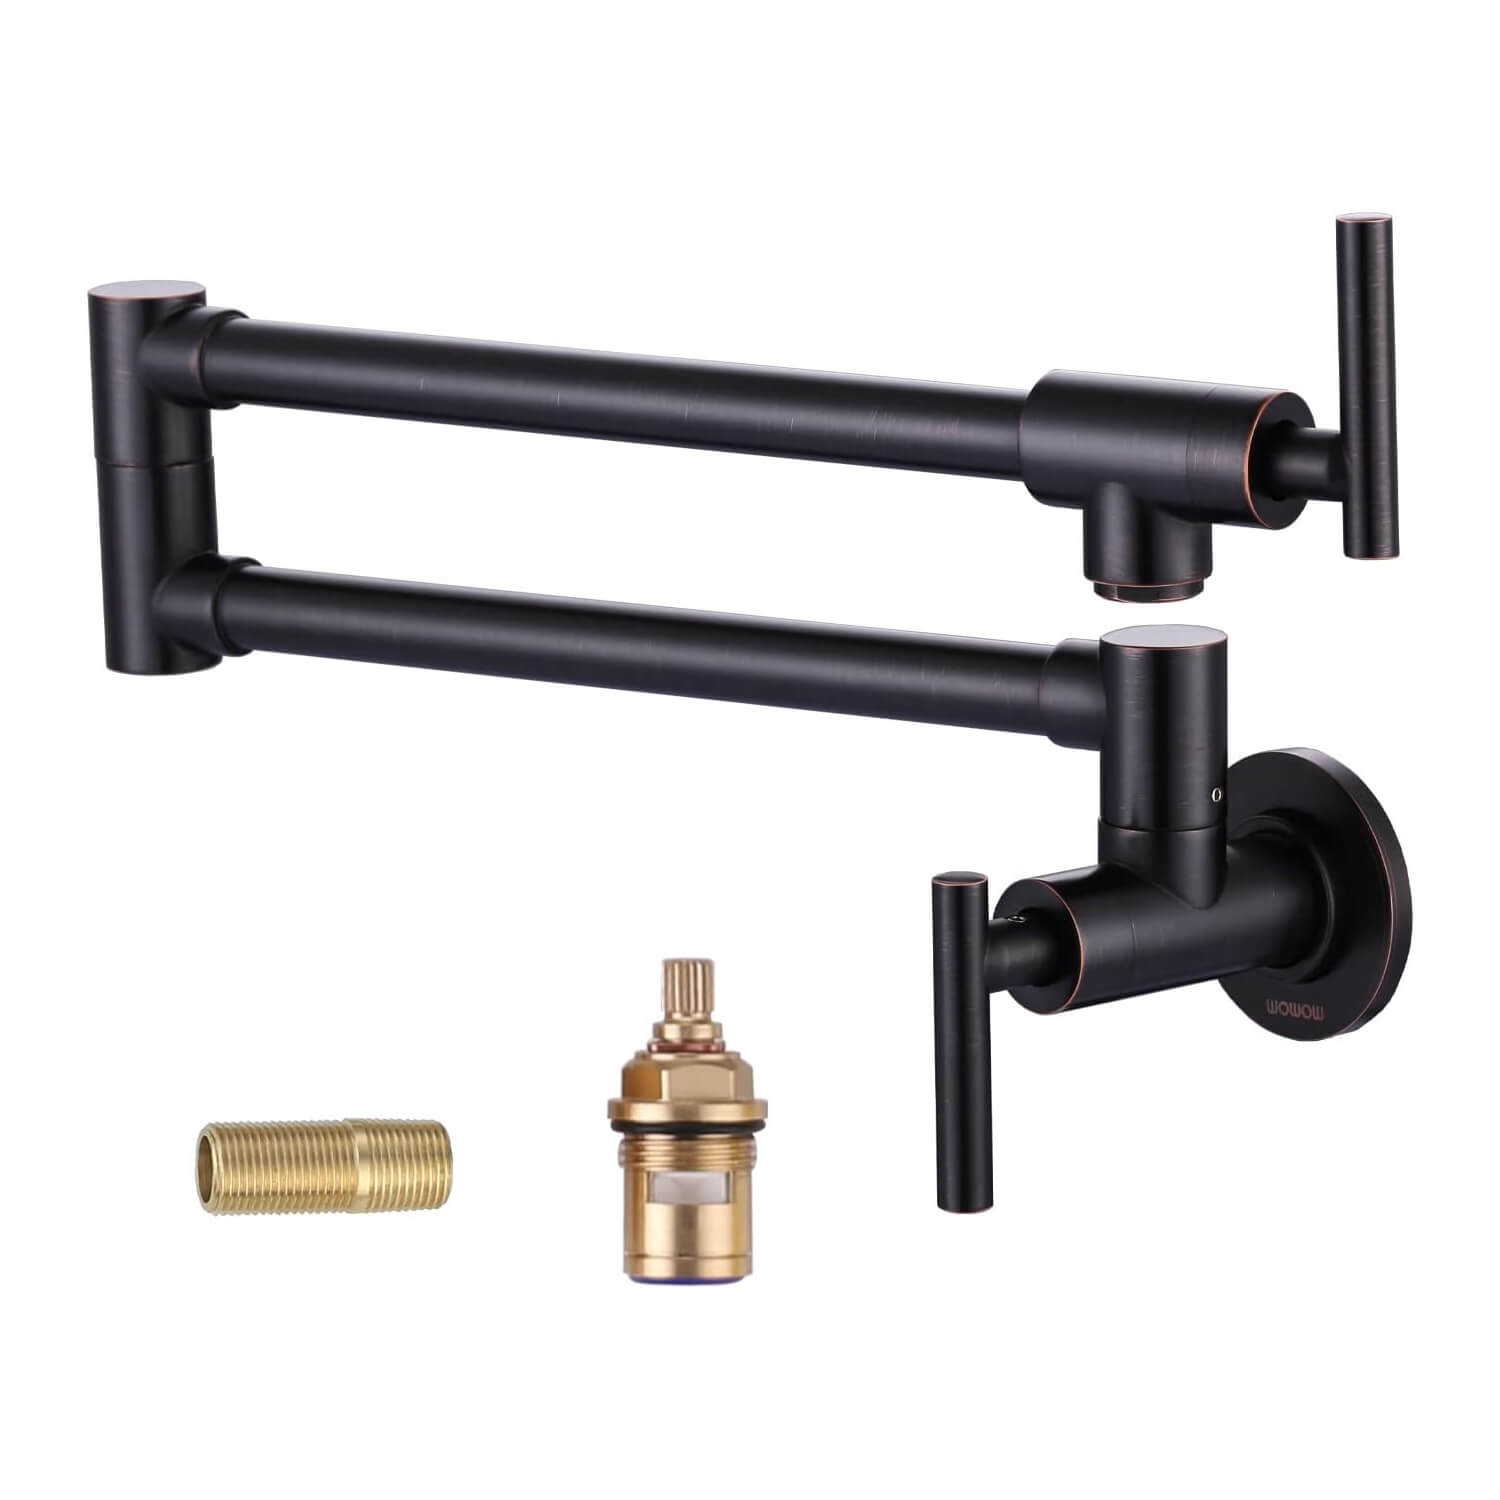 iVIGA Oil Rubbed Bronze Commercial Wall Mount Pot Filler Faucet Stretchable Double Joint Swing Arm